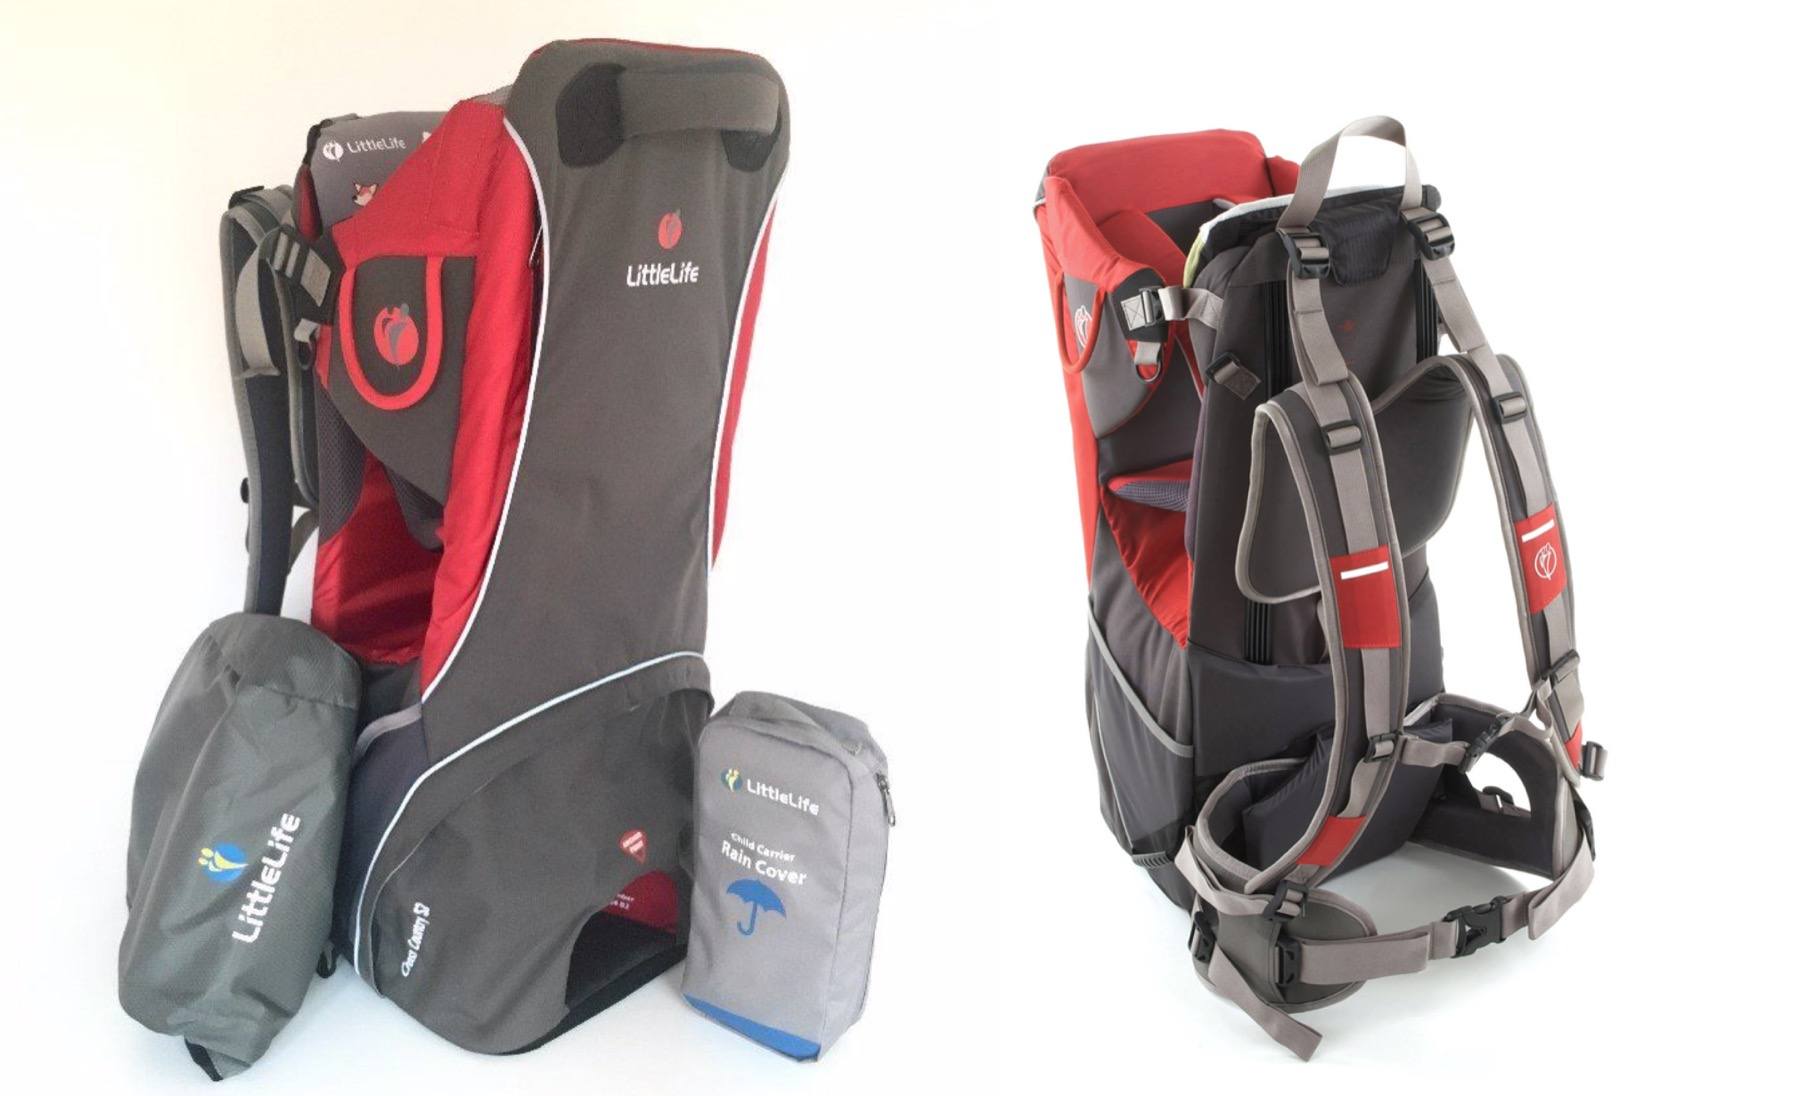 The LittleLife Cross Country S2 Child Carrier